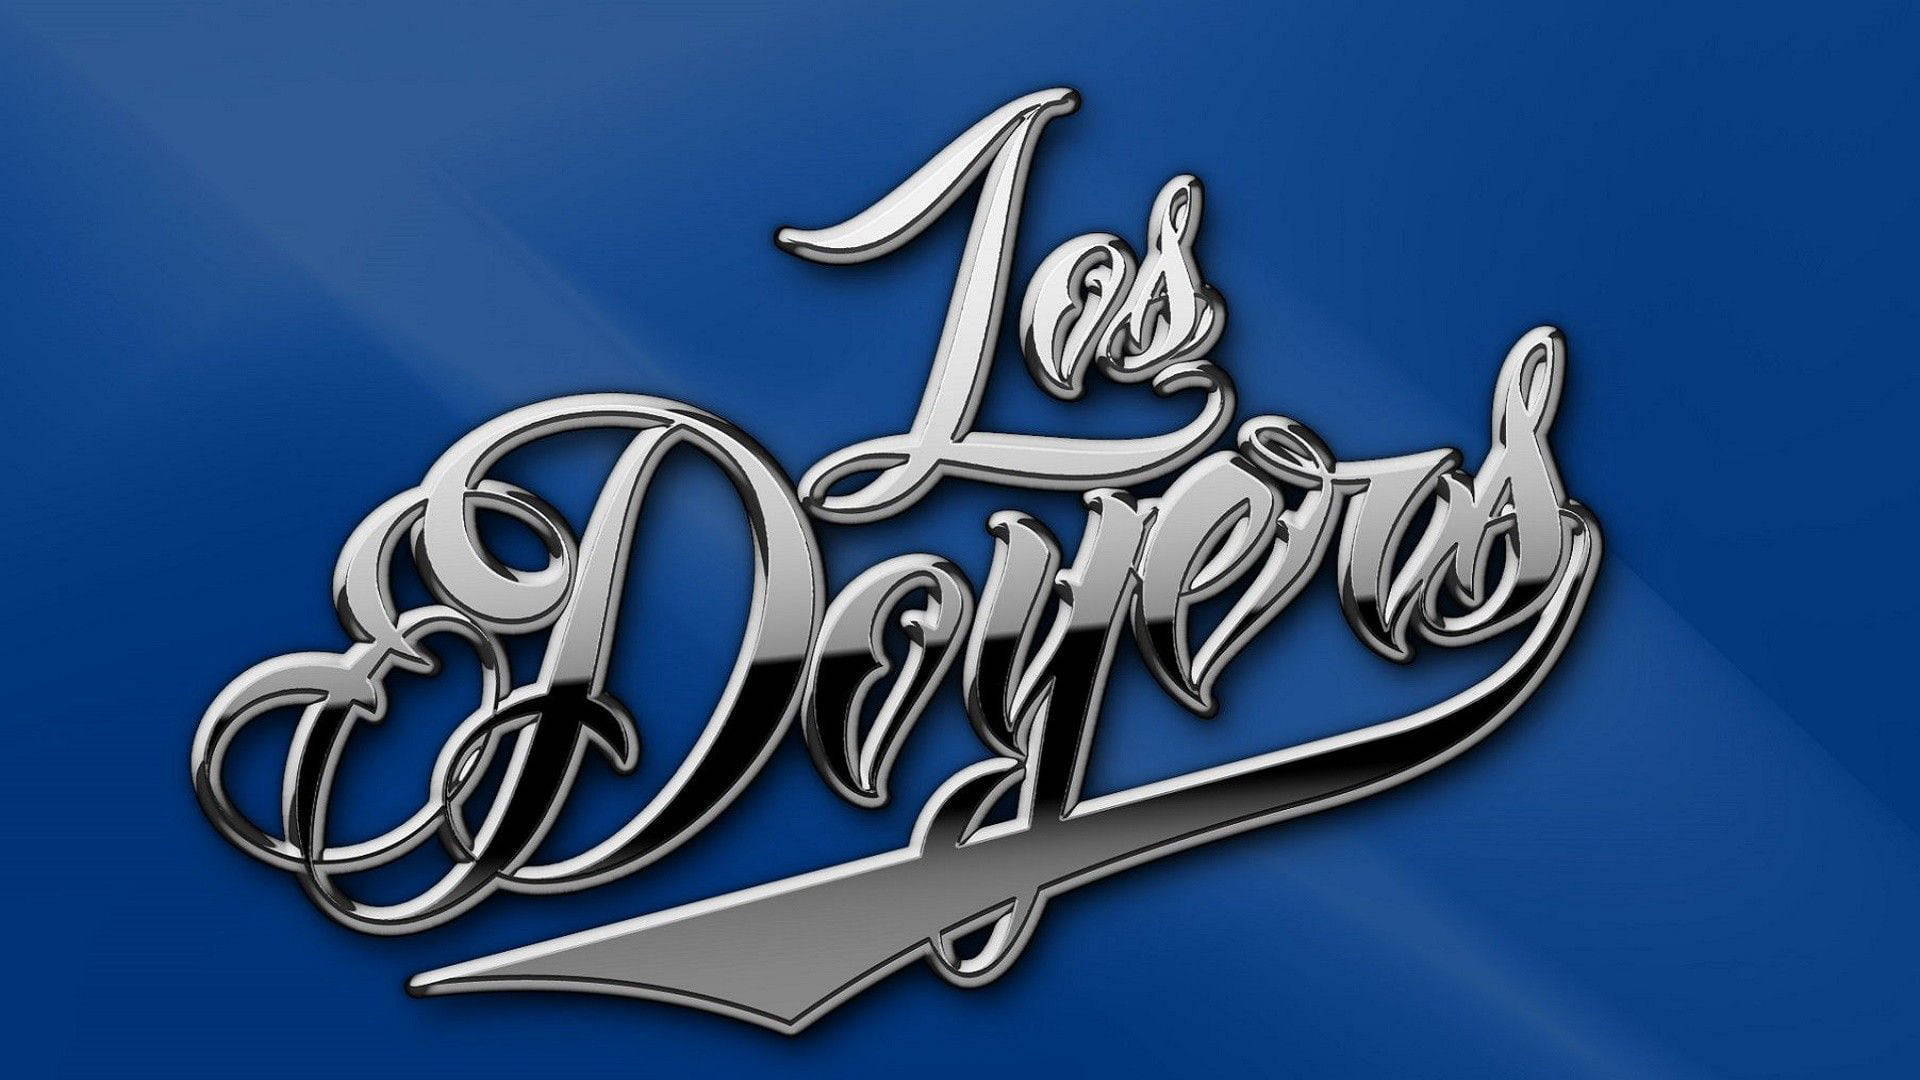 Los Angeles Dodgers Silvery Design Wallpaper